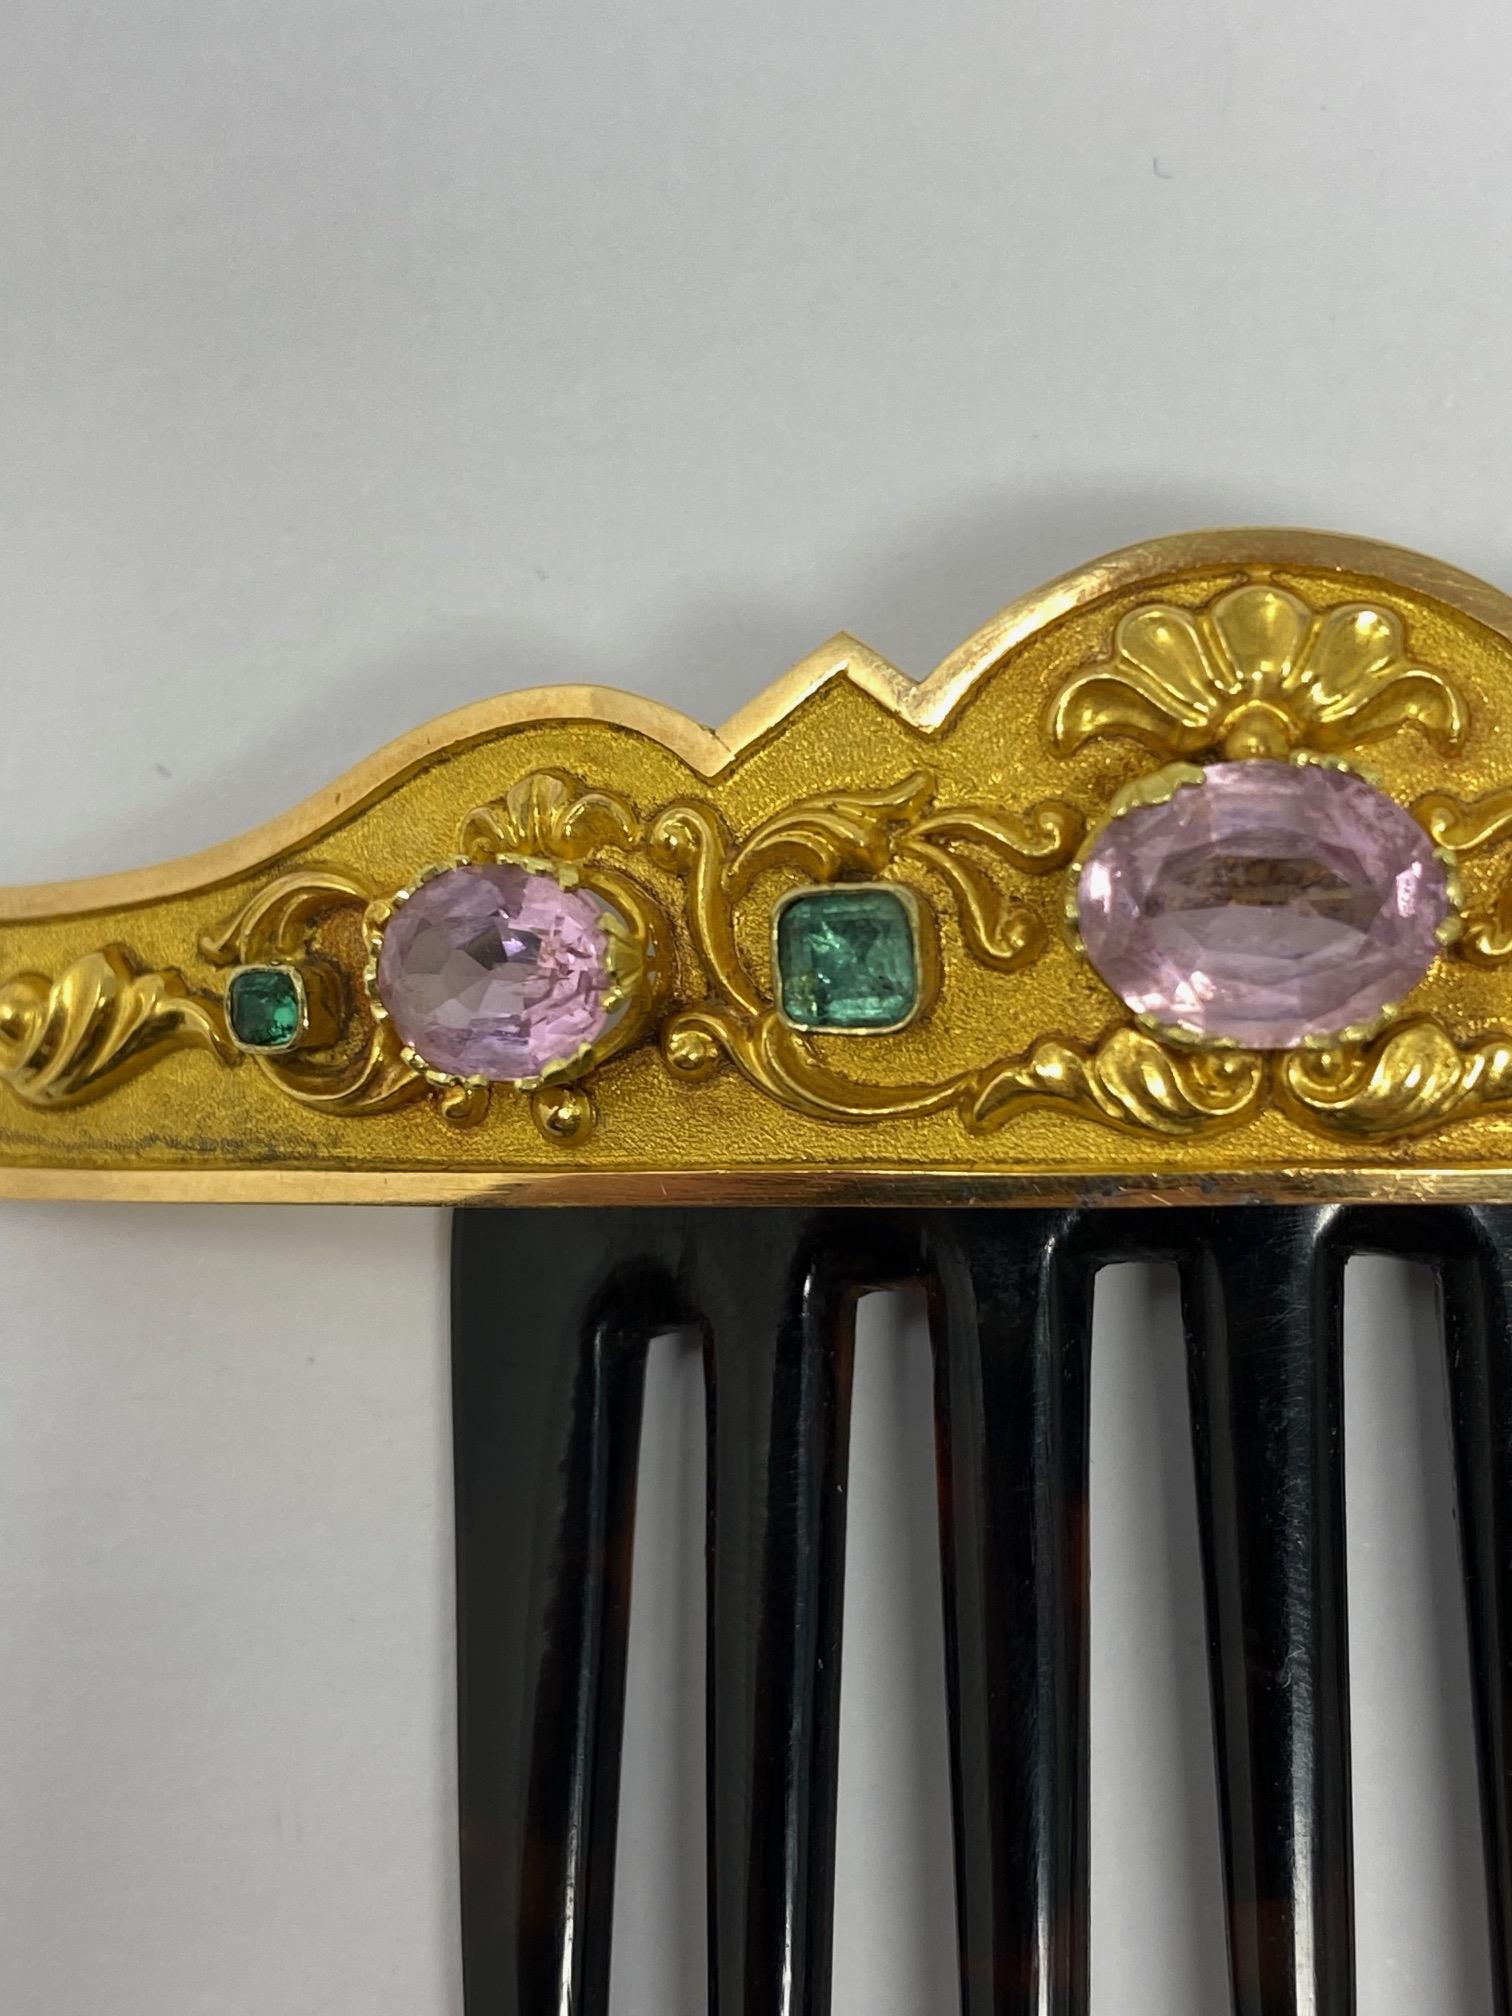 ˜ GOLD, TOPAZ, EMERALD AND TORTOISESHELL HAIR COMB, 1830s - Image 6 of 7